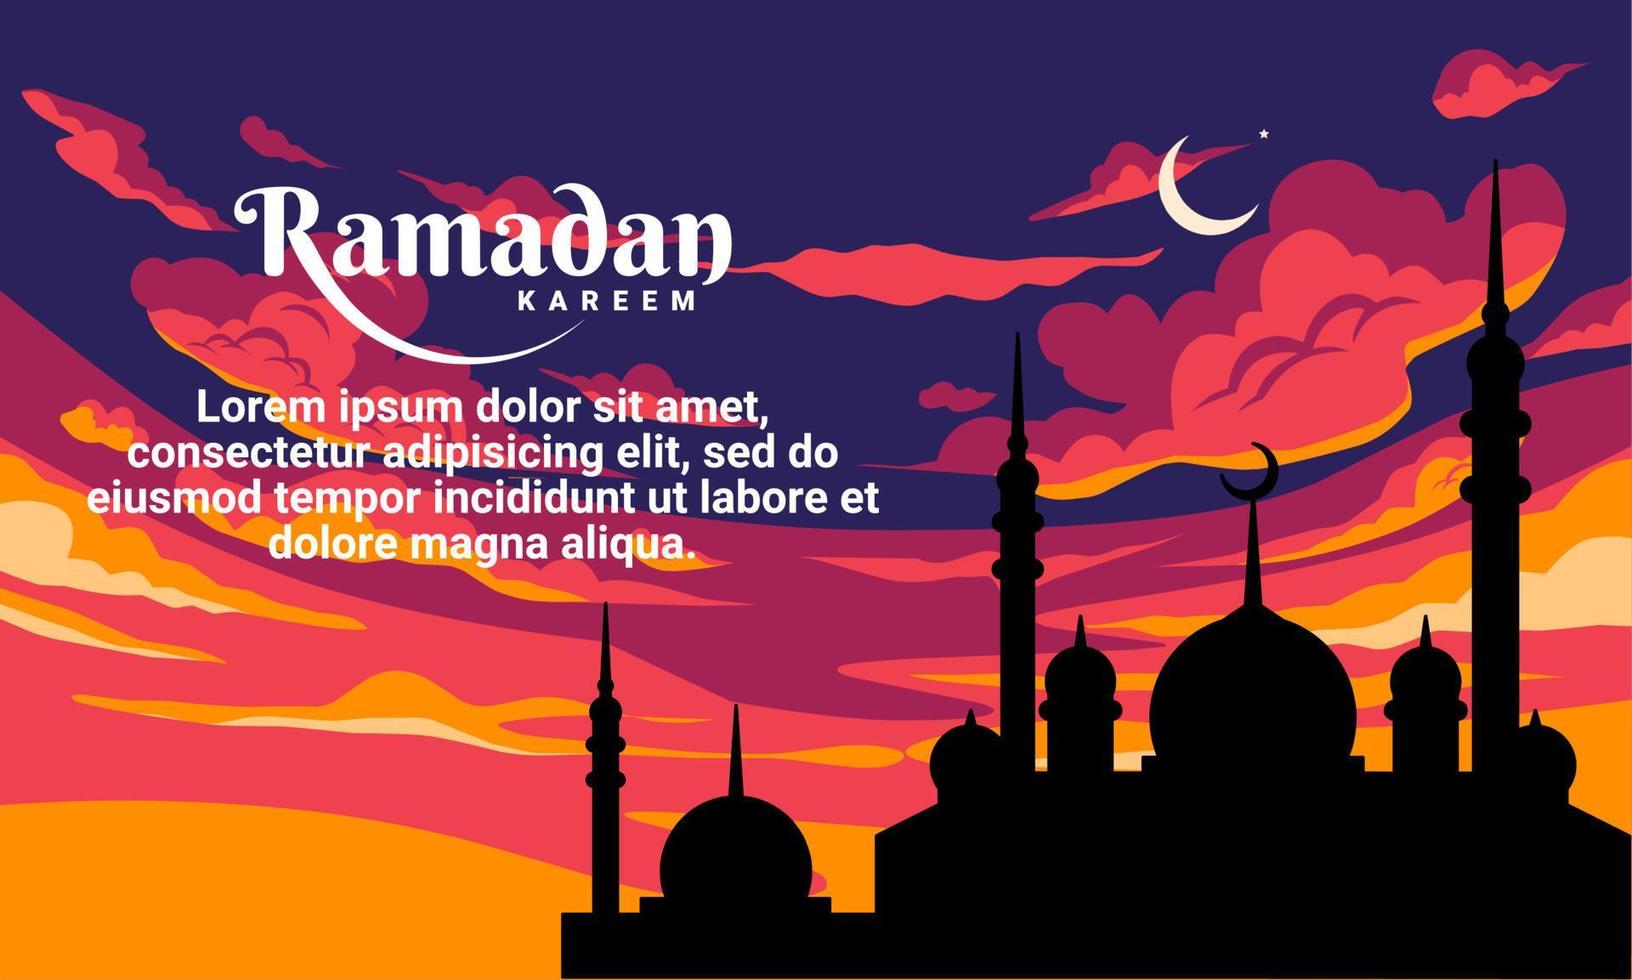 Ramadan Kareem Greeting Cards. the silhouette of the mosque with the sunset sky in the background. vector illustration.